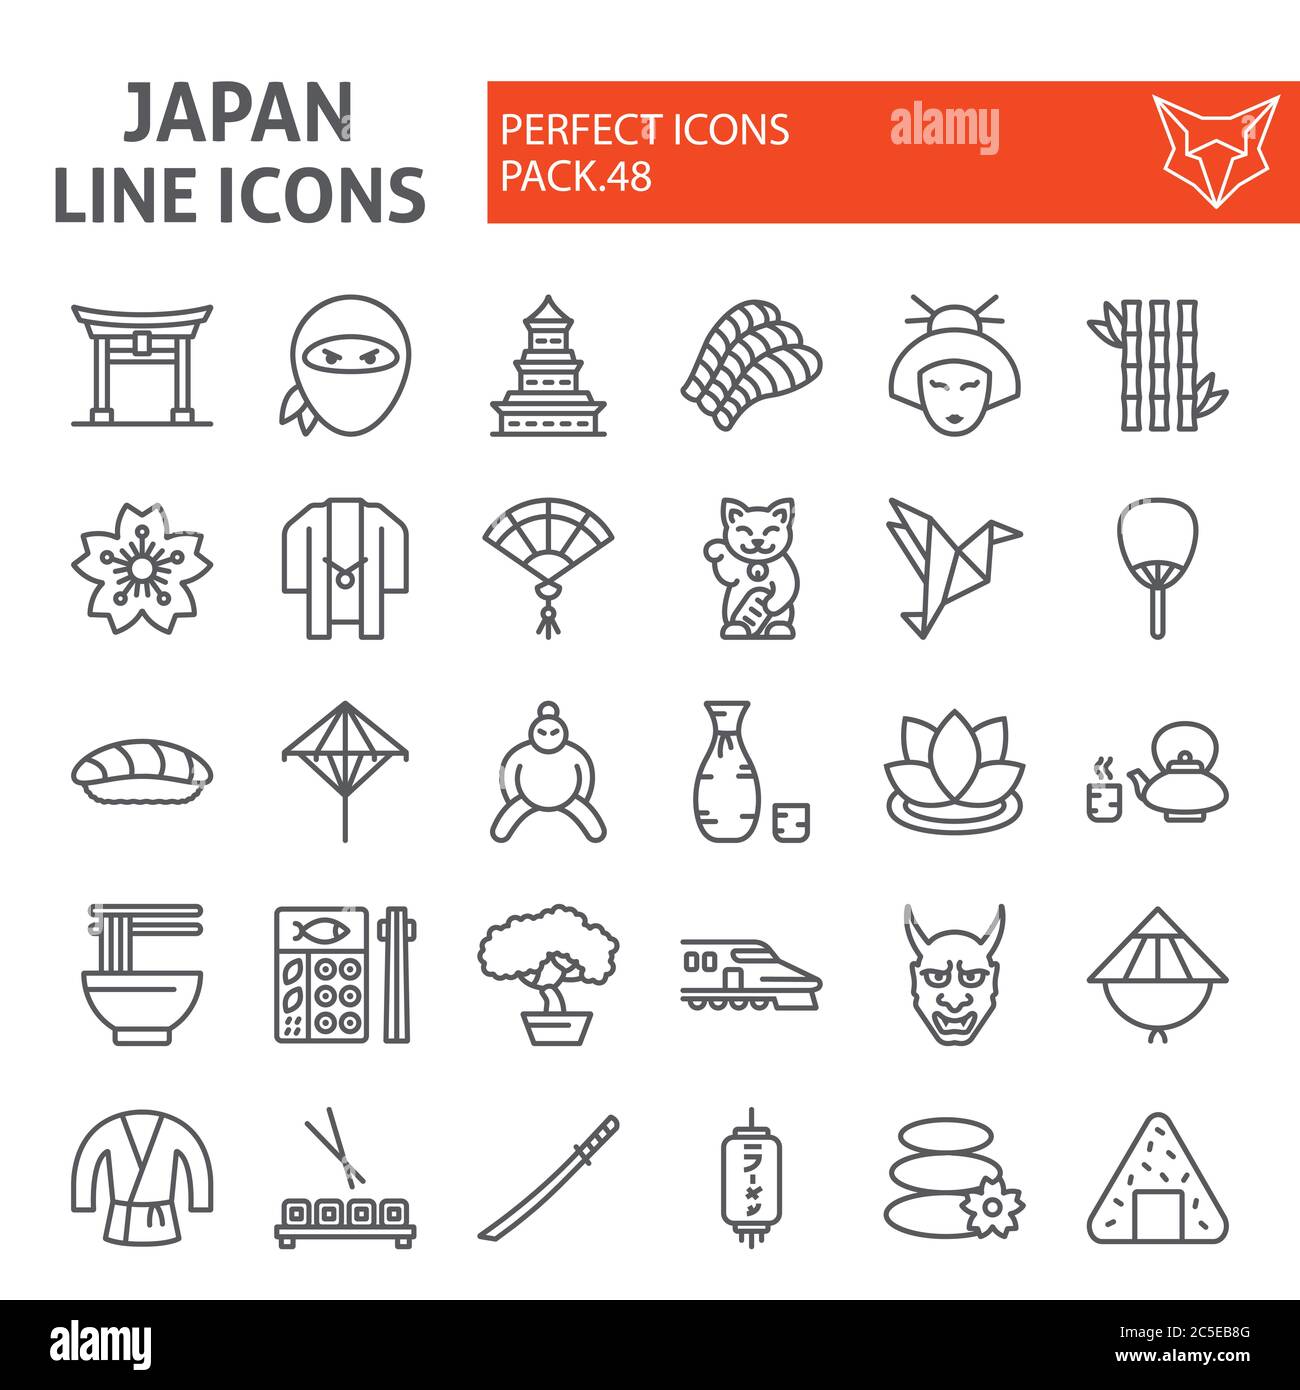 Japan line icon set, japanese food symbols collection, vector sketches, logo illustrations, asian culture signs linear pictograms package isolated on Stock Vector